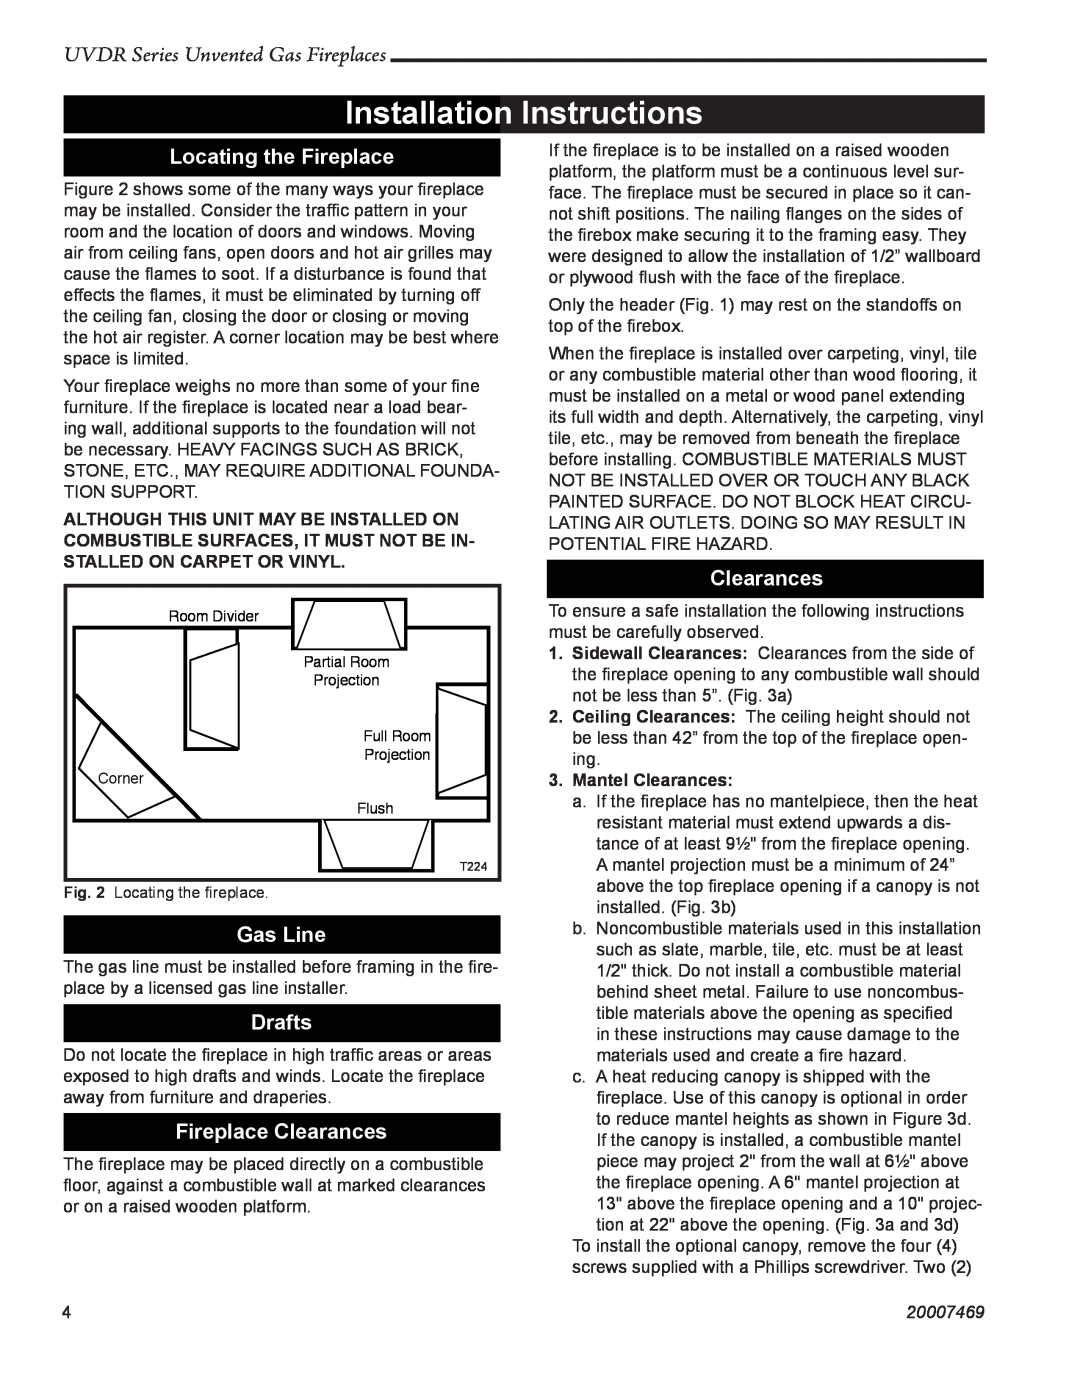 CFM Corporation UVDR42C, UVDR36C Installation Instructions, Locating the Fireplace, Gas Line, Drafts, Fireplace Clearances 